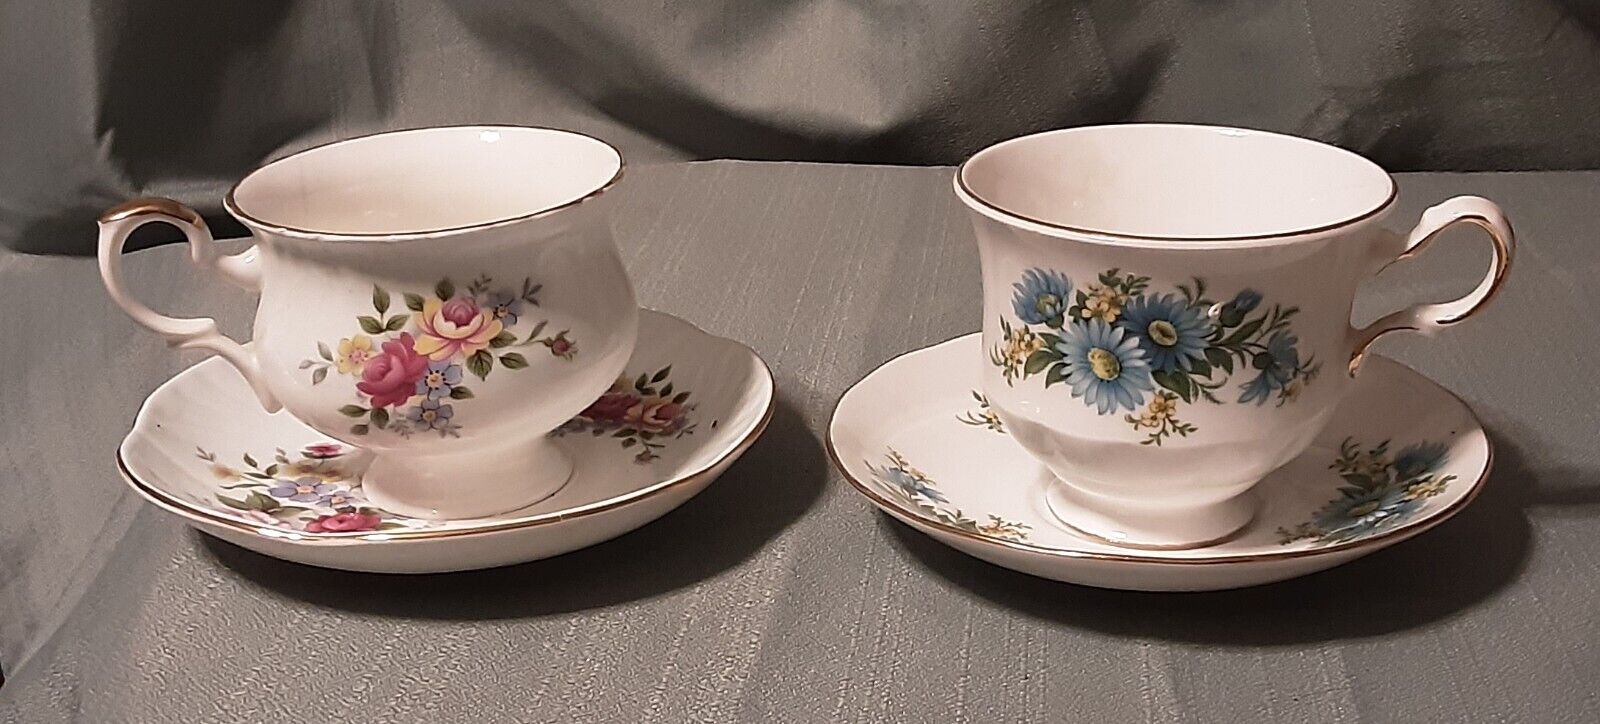 Vintage Bone China Tea Cups, Staffordshire & Queen Anne, England, Floral